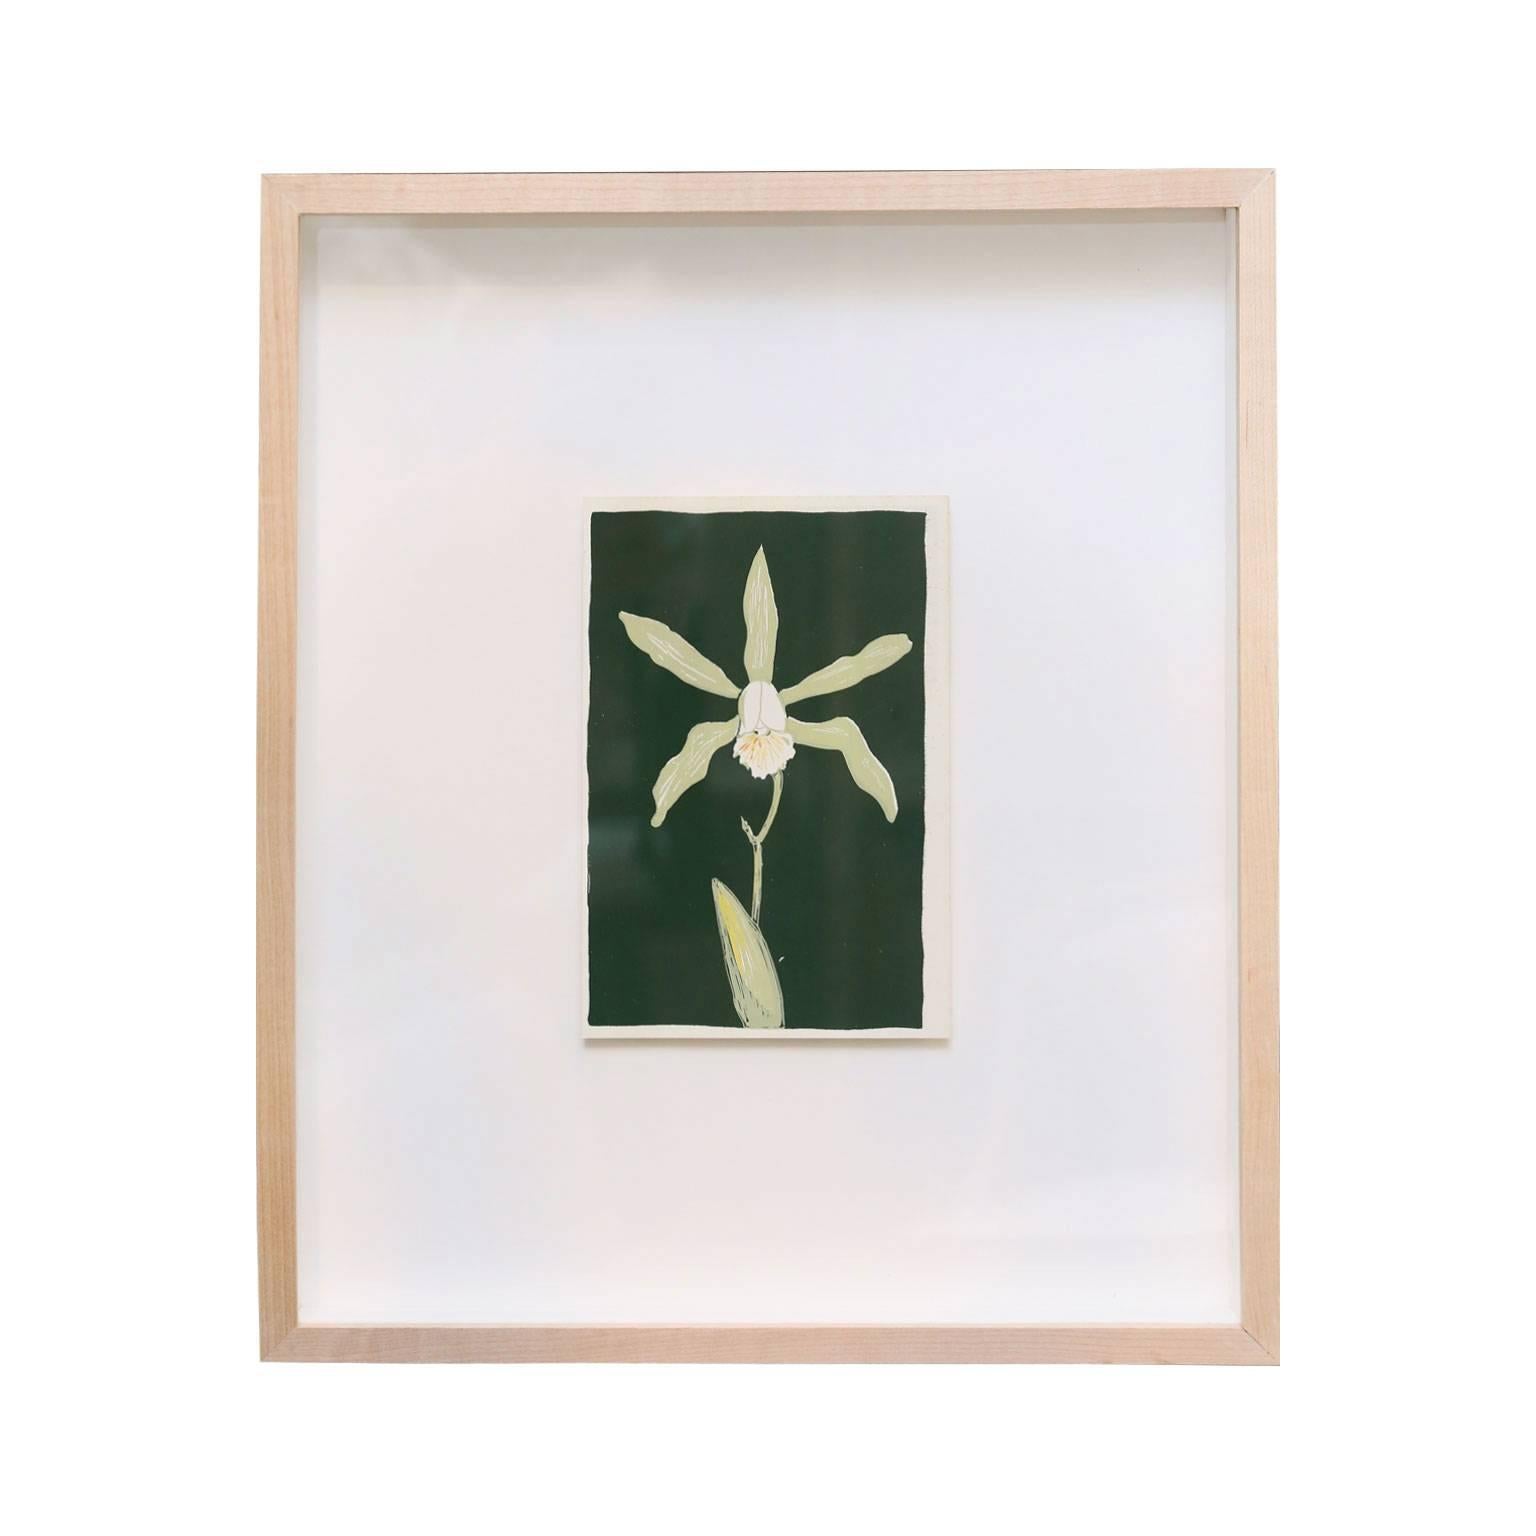 Nine colorful orchid serigraphs from Botanical Orchids, Blotter Press, 1966 (limited to 300 copies). Hand-pulled silk-screened orchids by Jim Anderson. Actual measurements of unframed prints are approximately 7.5 inches by 4.75 inches. Float mounted